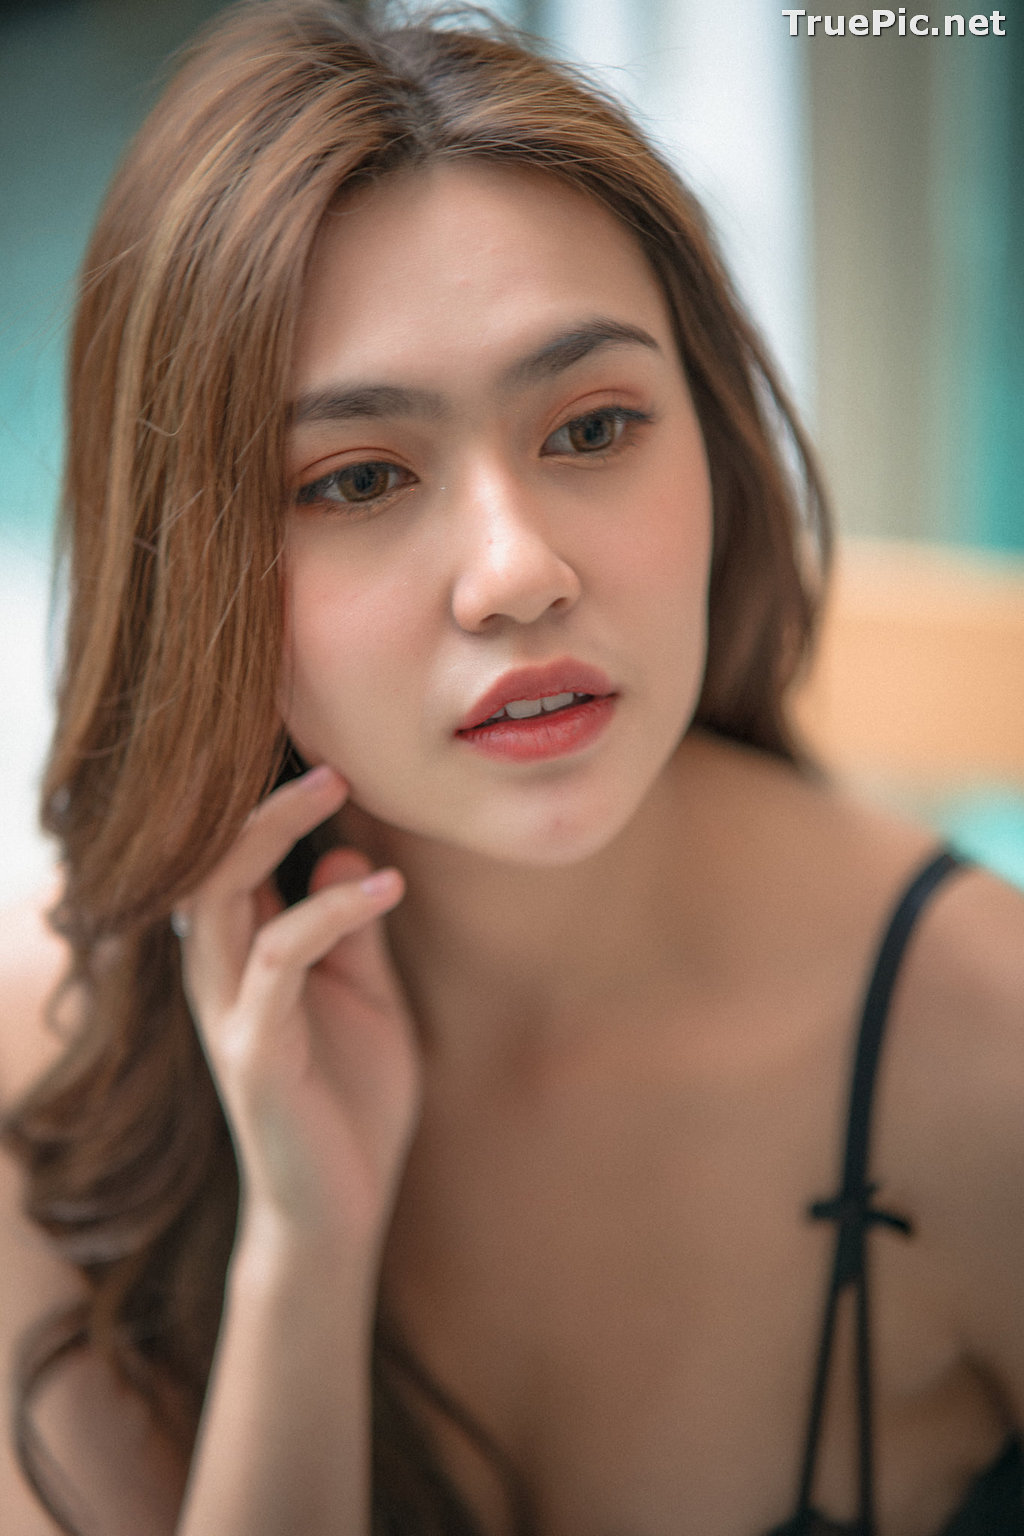 Image Thailand Model – Baifern Rinrucha – Beautiful Picture 2020 Collection - TruePic.net - Picture-28